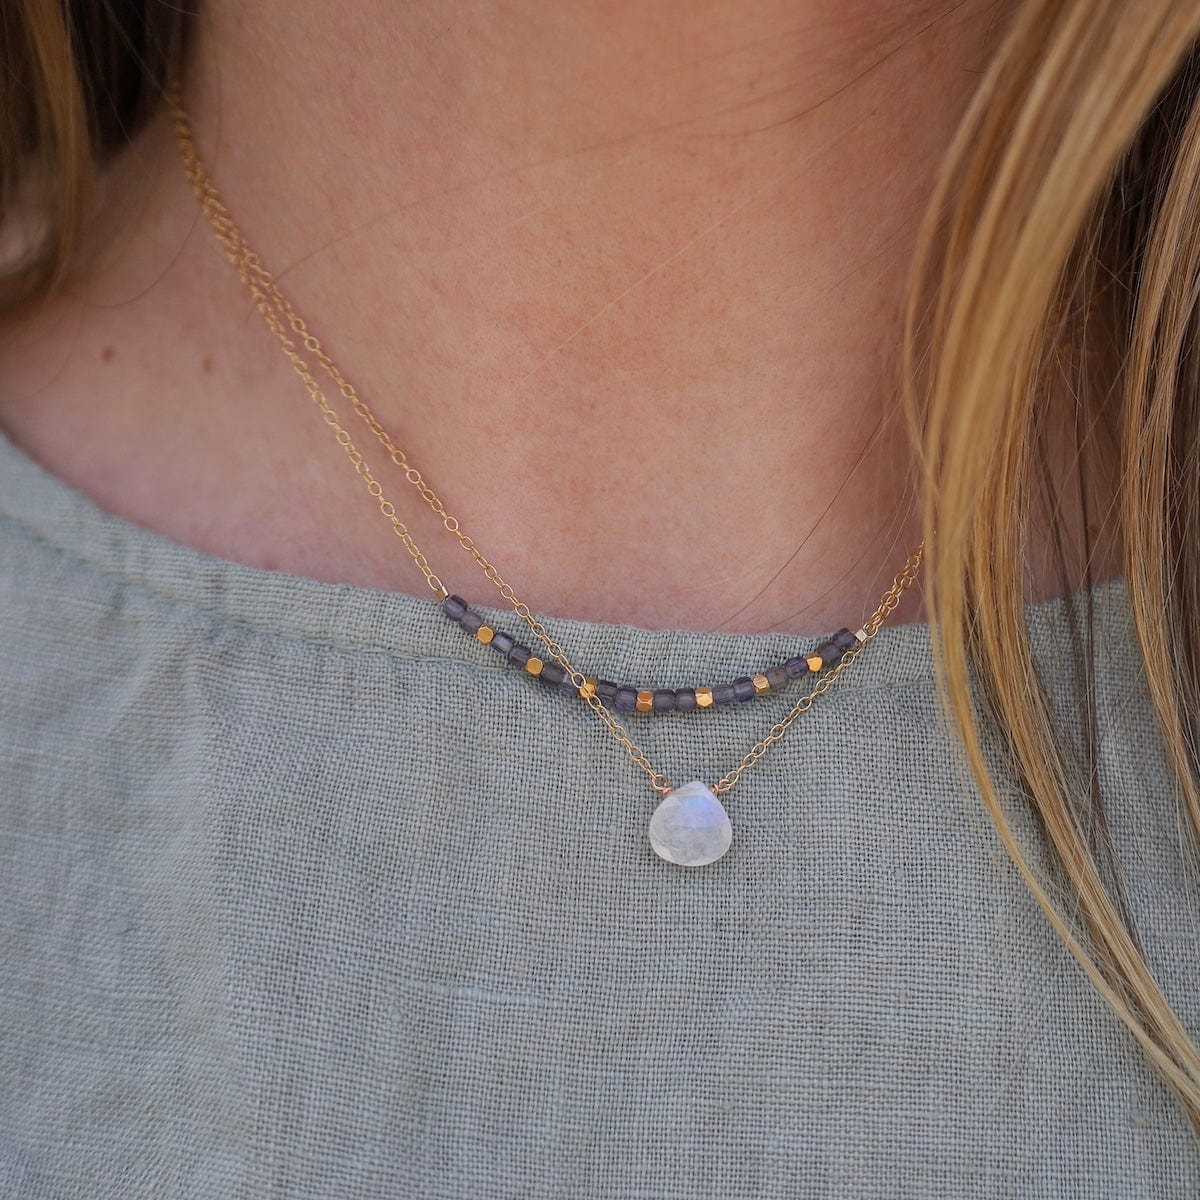 NKL-GF Gold Filled Chain with Moonstone Brio Necklace